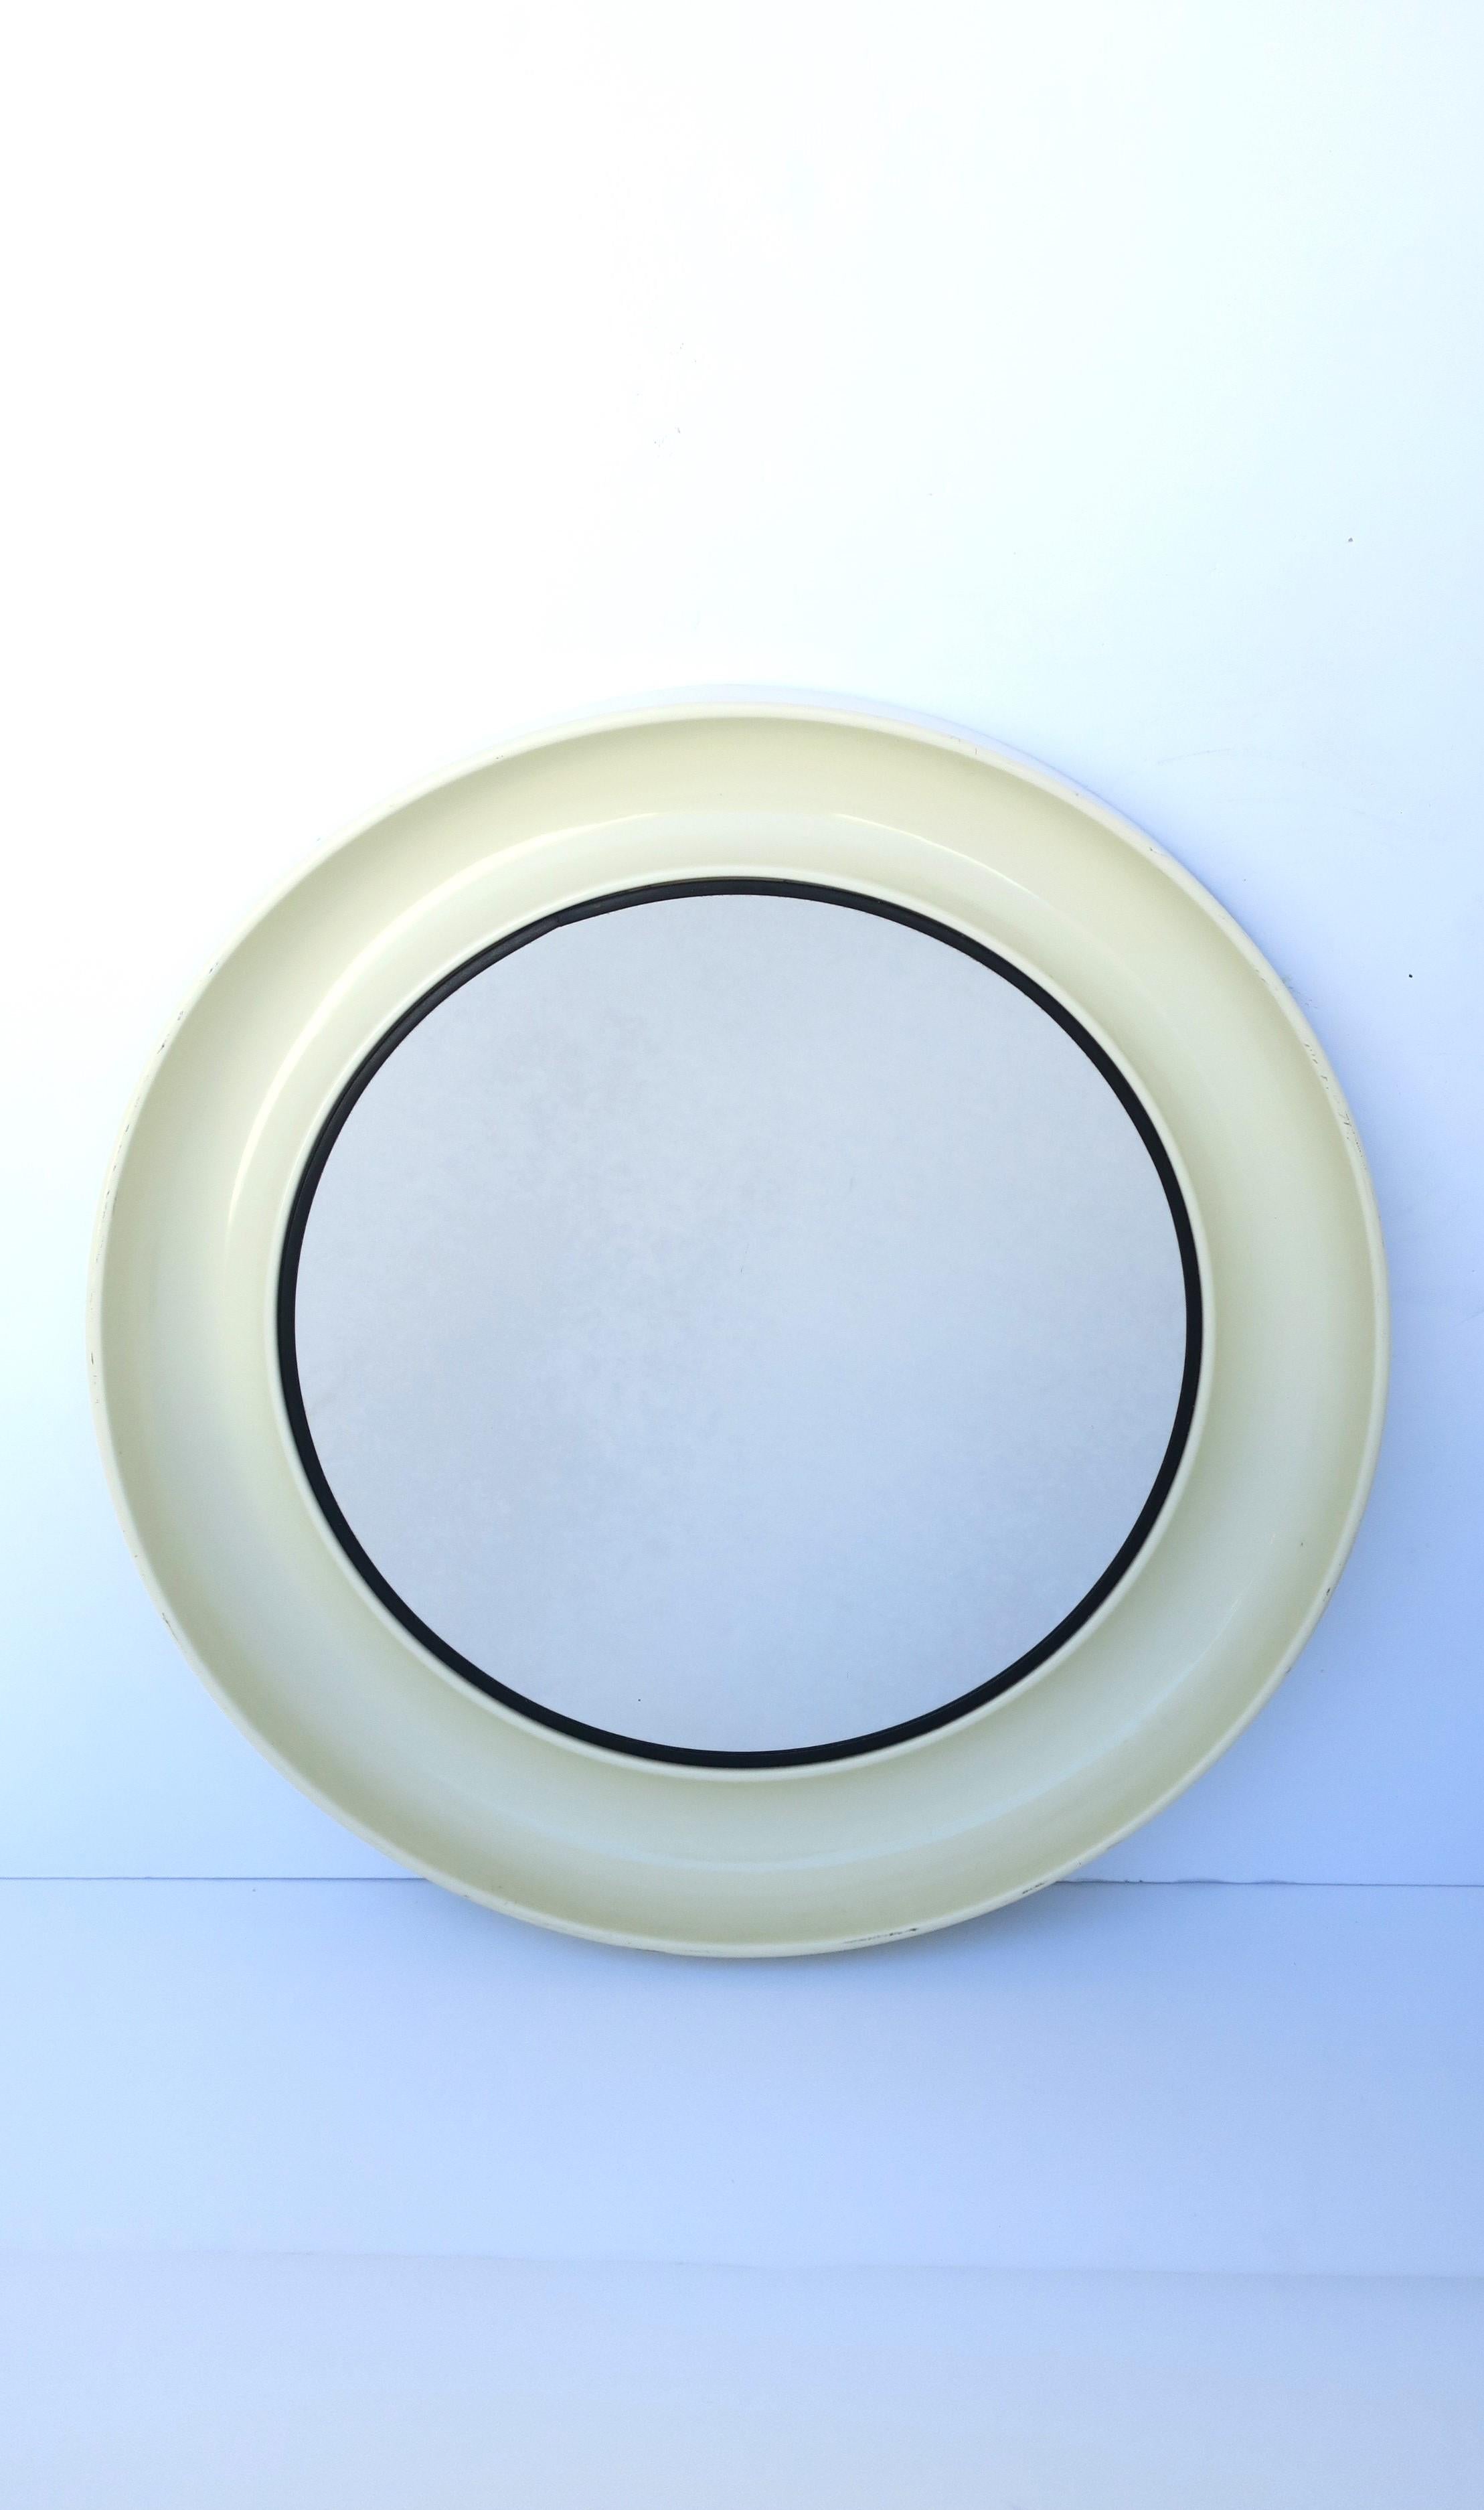 A chic Post-Modern Scandinavian Danish off-white cream and black round wall mirror, circa late-20th century, Denmark. Mirror's frame is an off-white cream hue with black accent around glass mirror. Mirror's frame is a plastic material with a concave